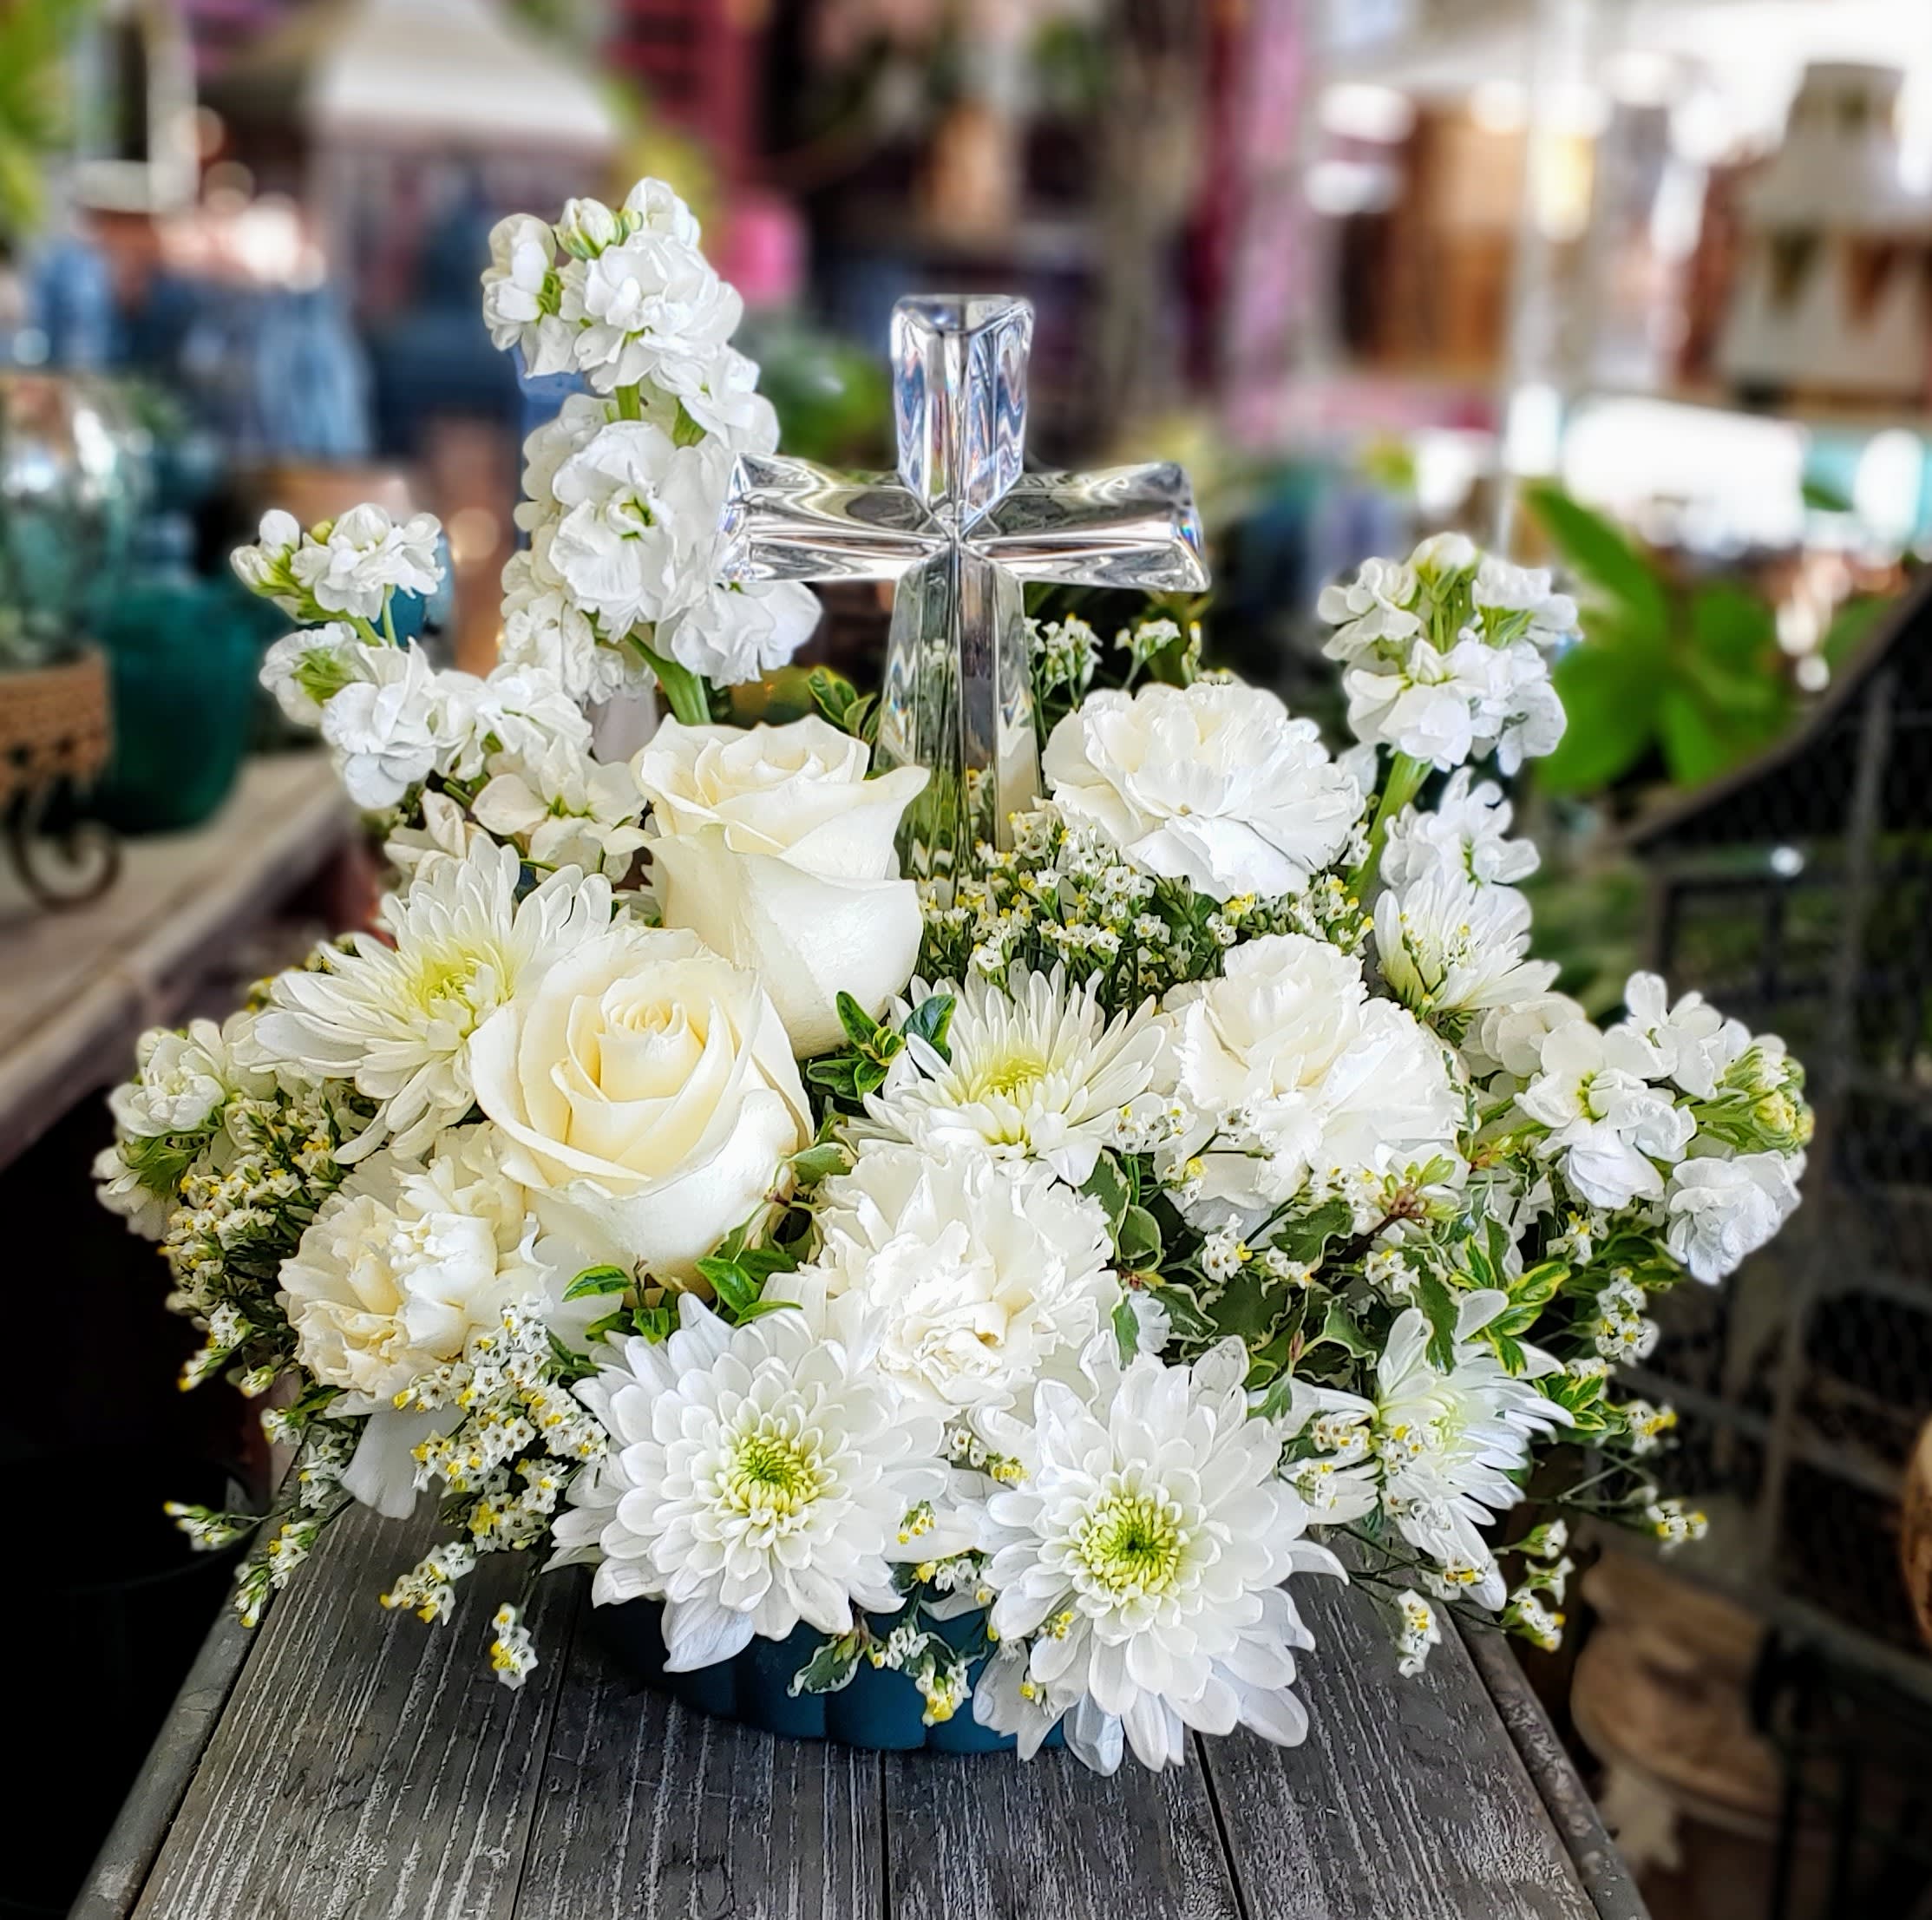 Crystal Cross - An all white arrangement with a keepsake crystal cross. An ideal arrangement for either the home or service.